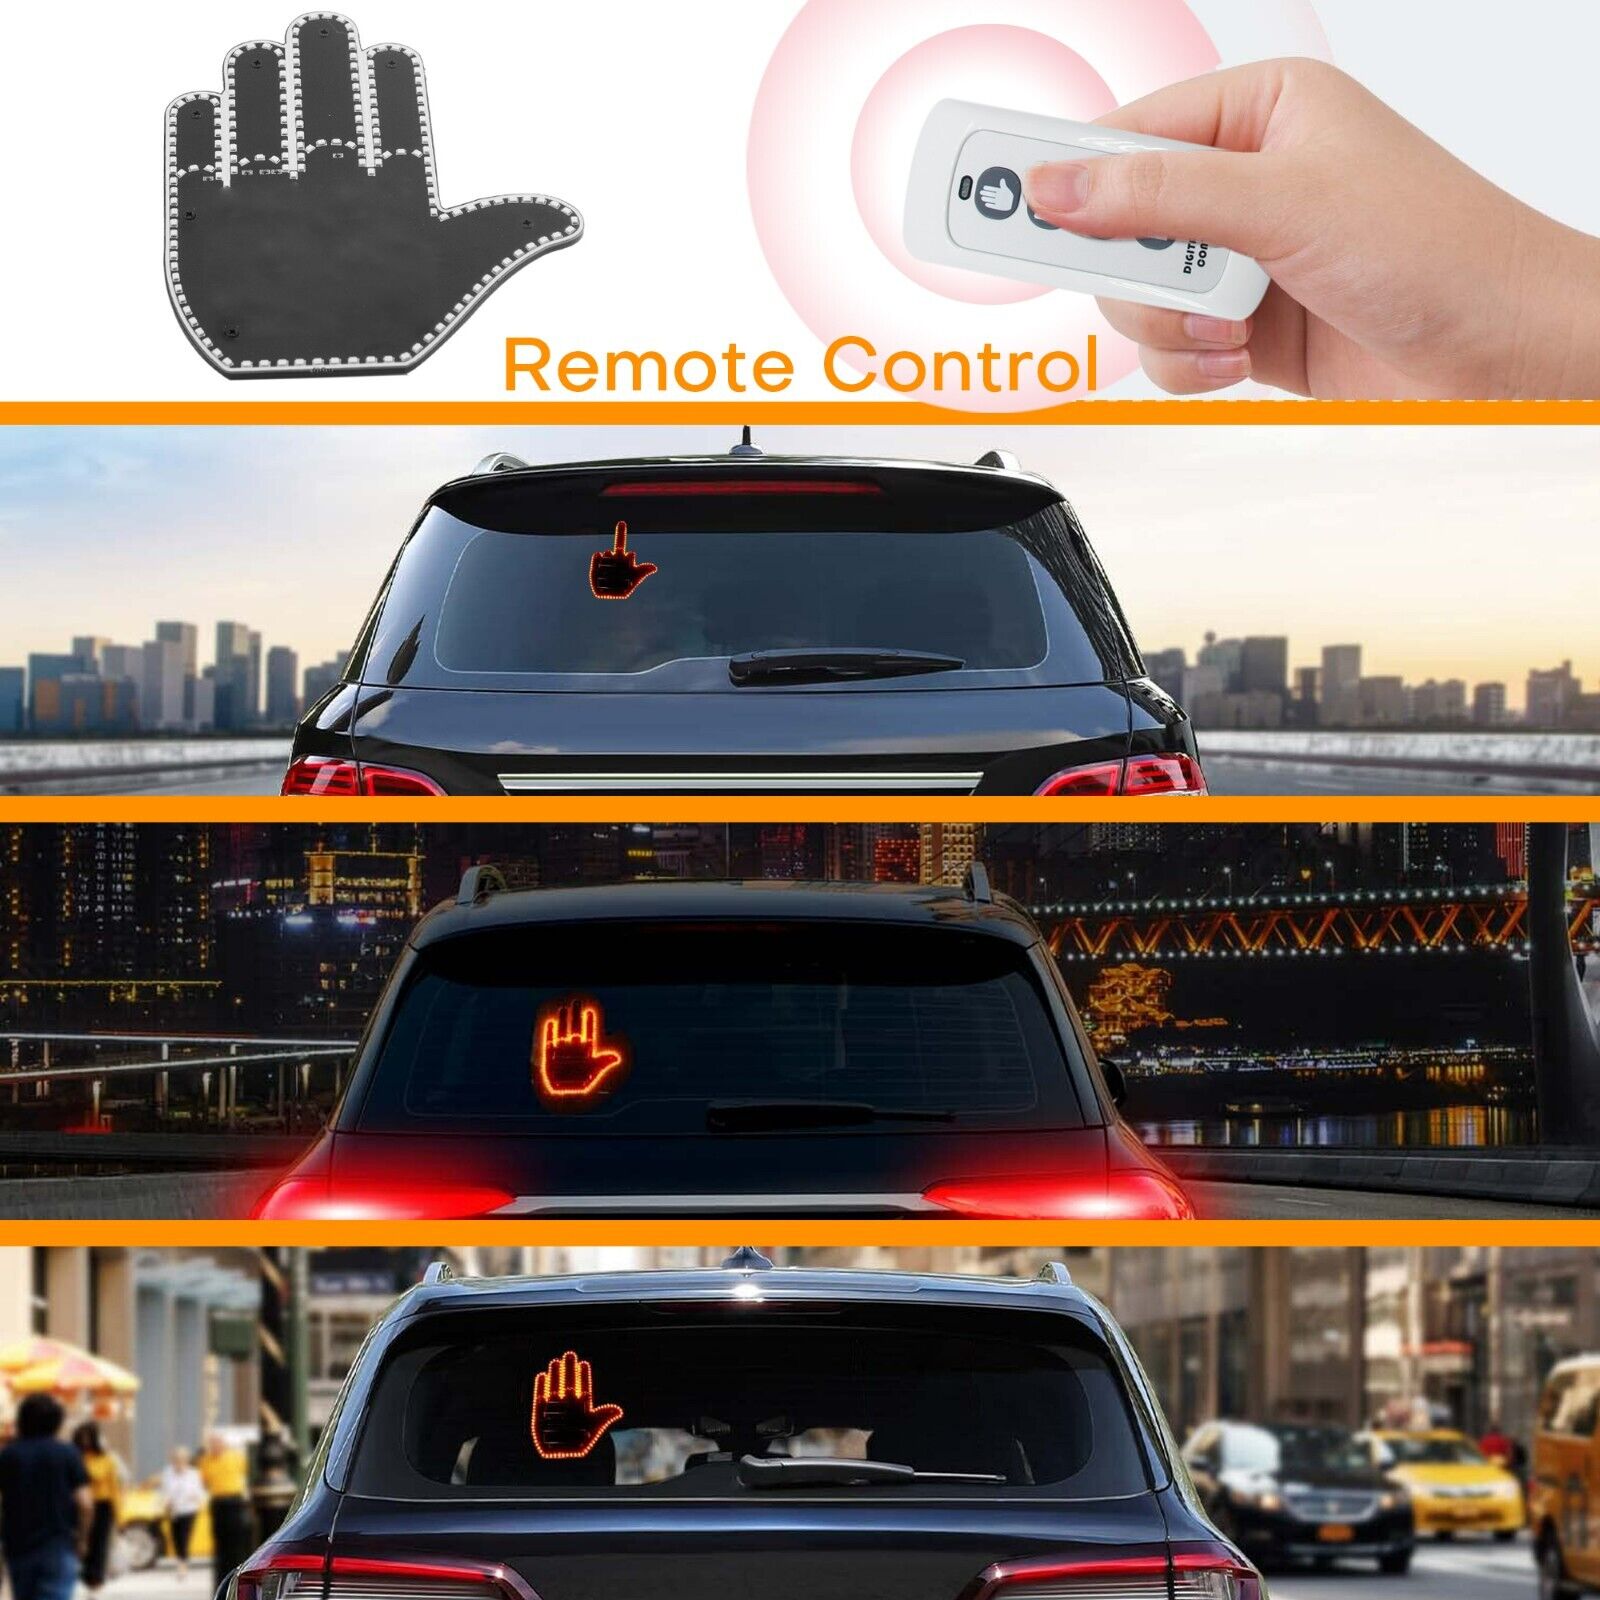 The RoadRater™ LED Hand Gesture Car Light with Remote